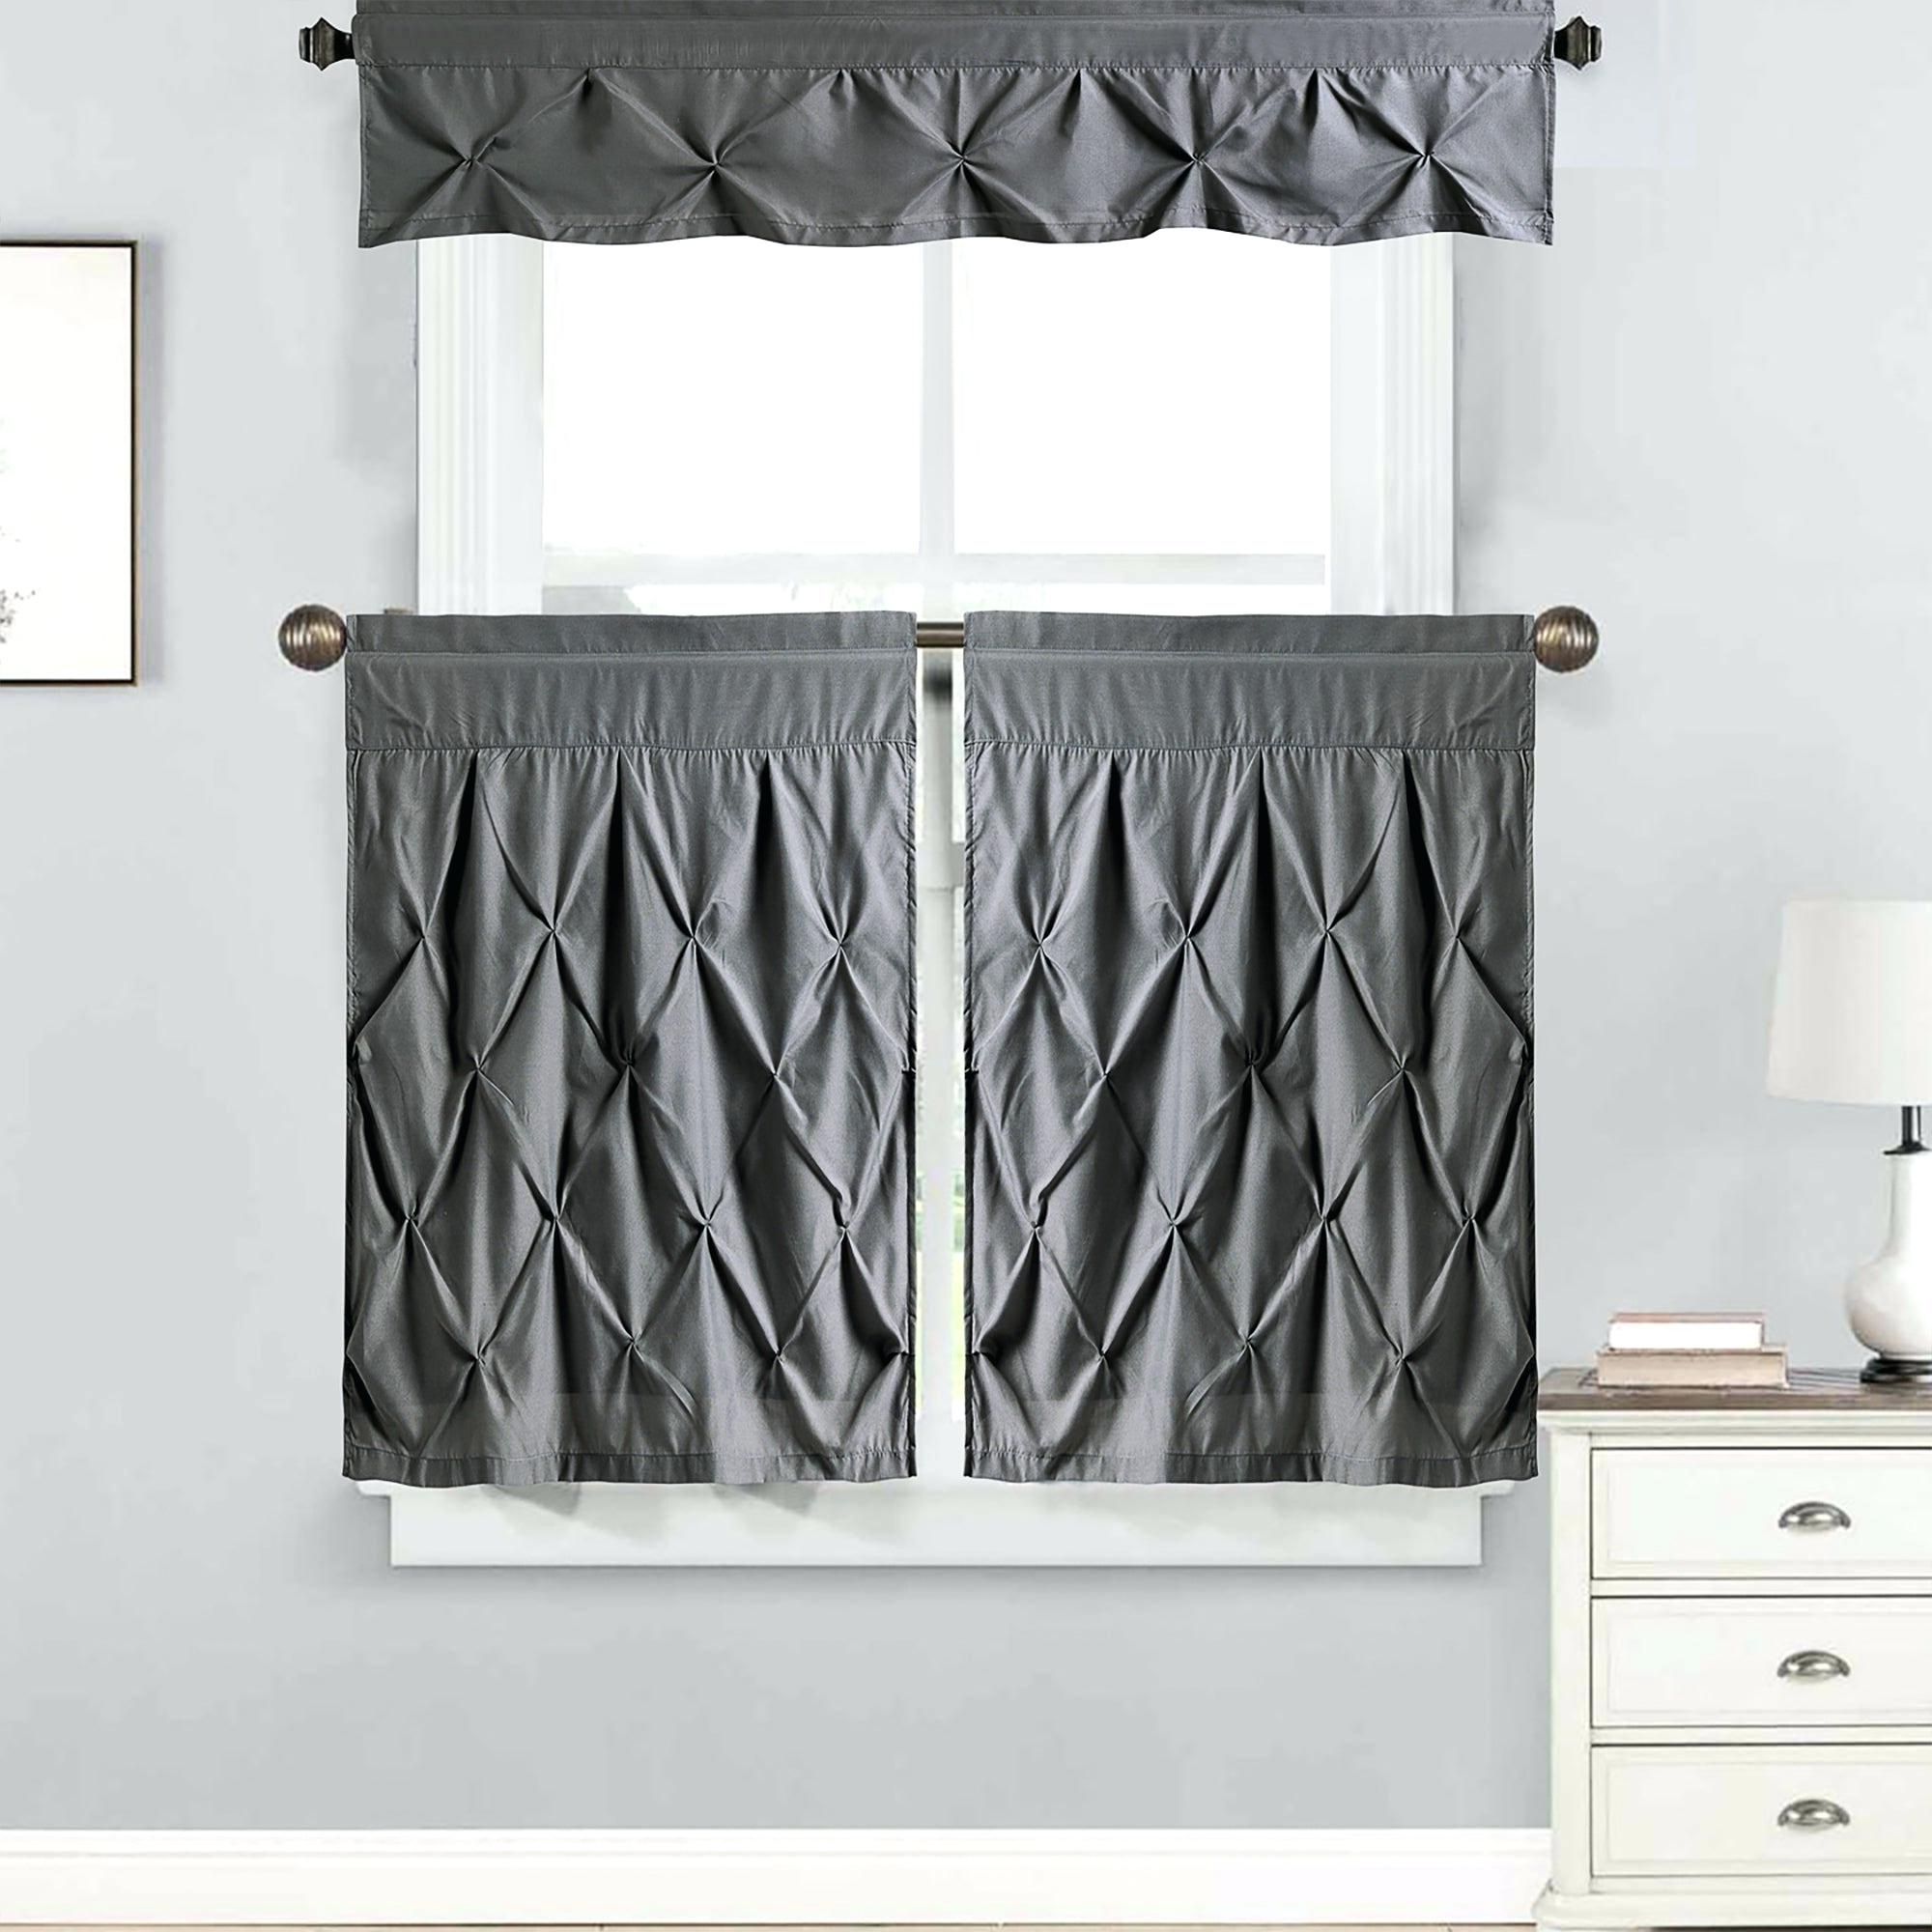 Most Up To Date Curtain Sets With Valance – Mnkskin Inside Imperial Flower Jacquard Tier And Valance Kitchen Curtain Sets (View 6 of 20)